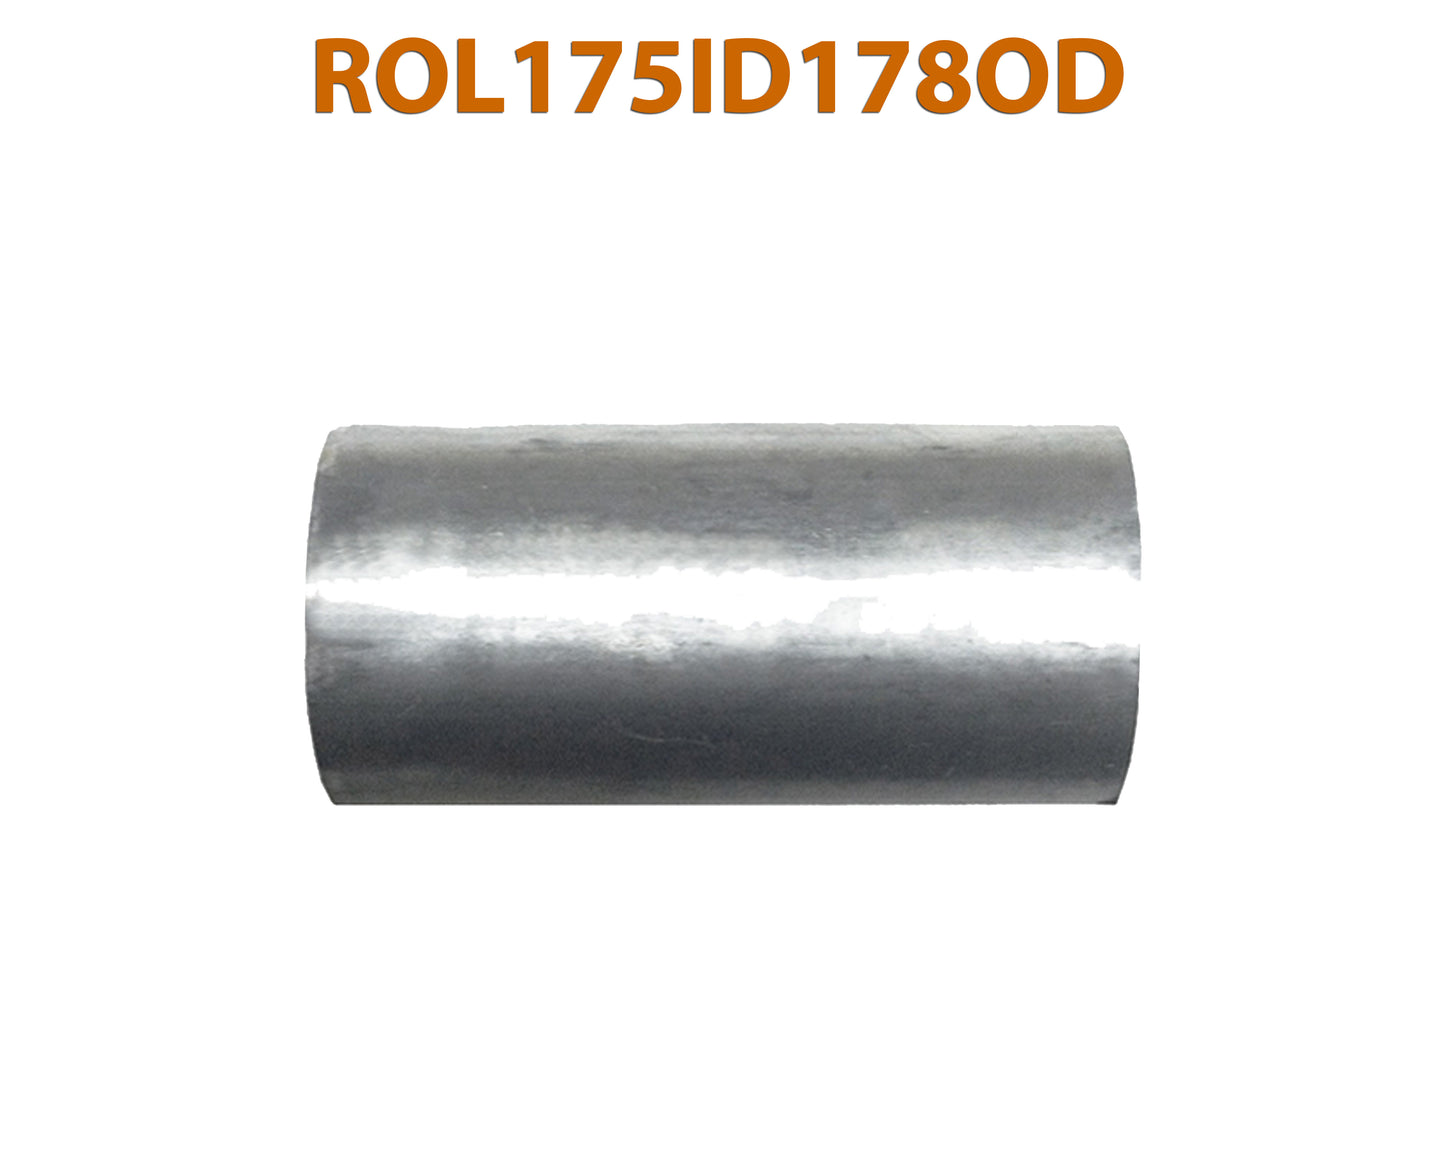 ROL175ID178OD 548537 1 3/4” ID to 1 7/8” OD Universal Exhaust Pipe to Component Adapter Reducer